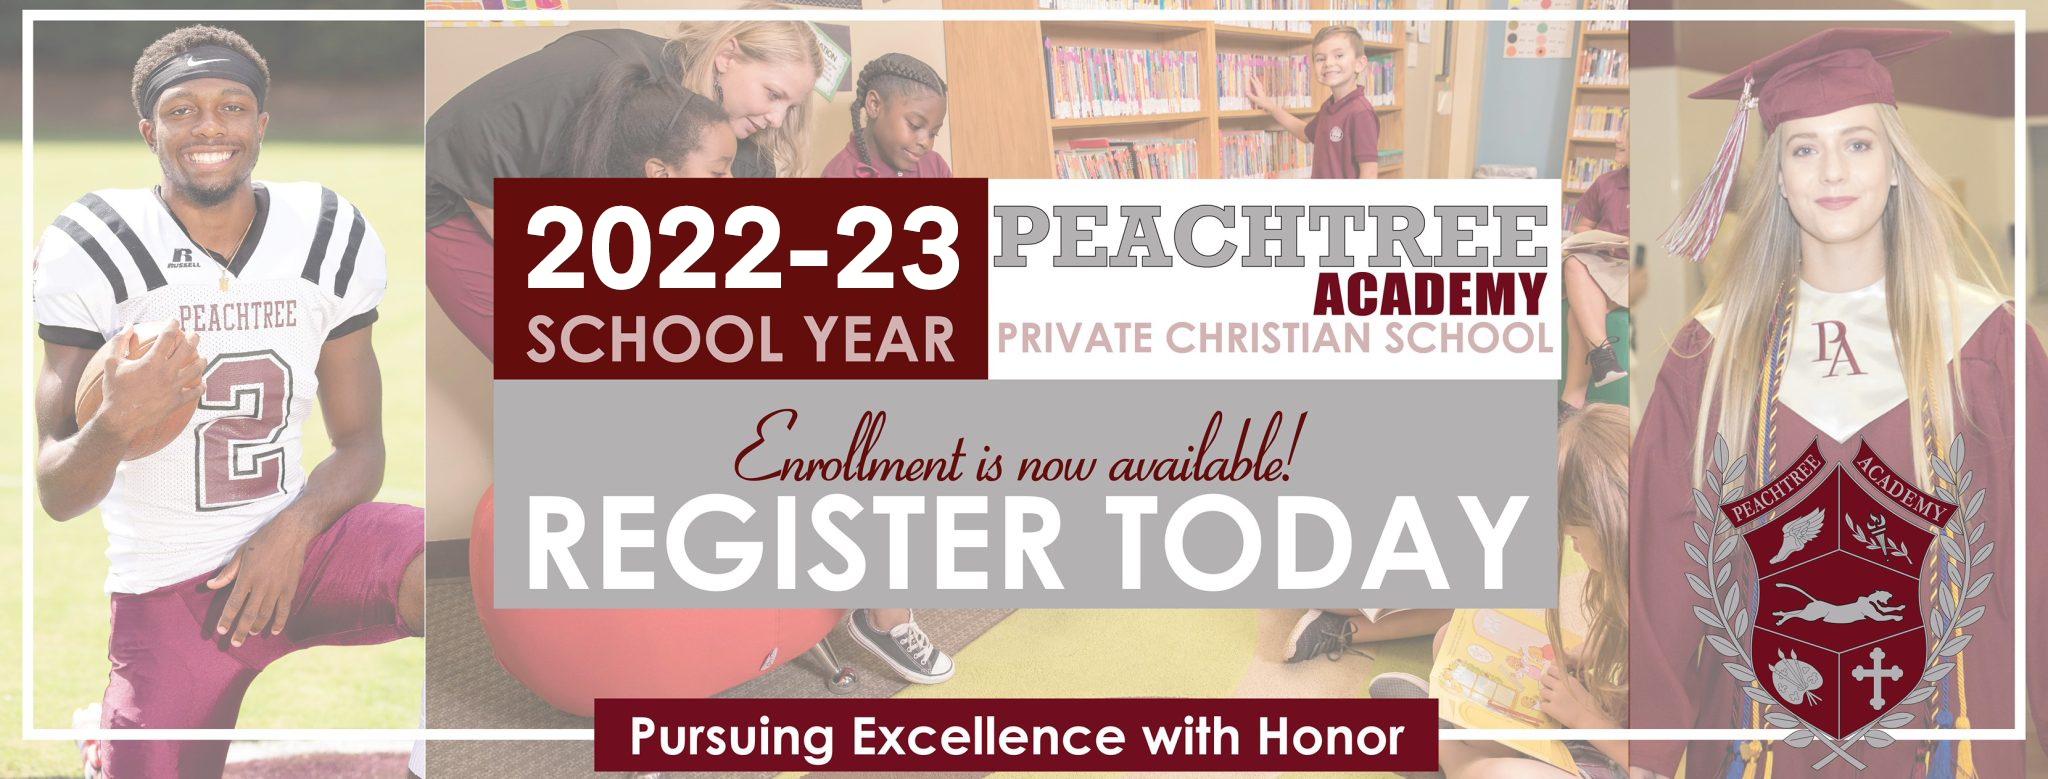 Peachtree Academy – Private Christian School